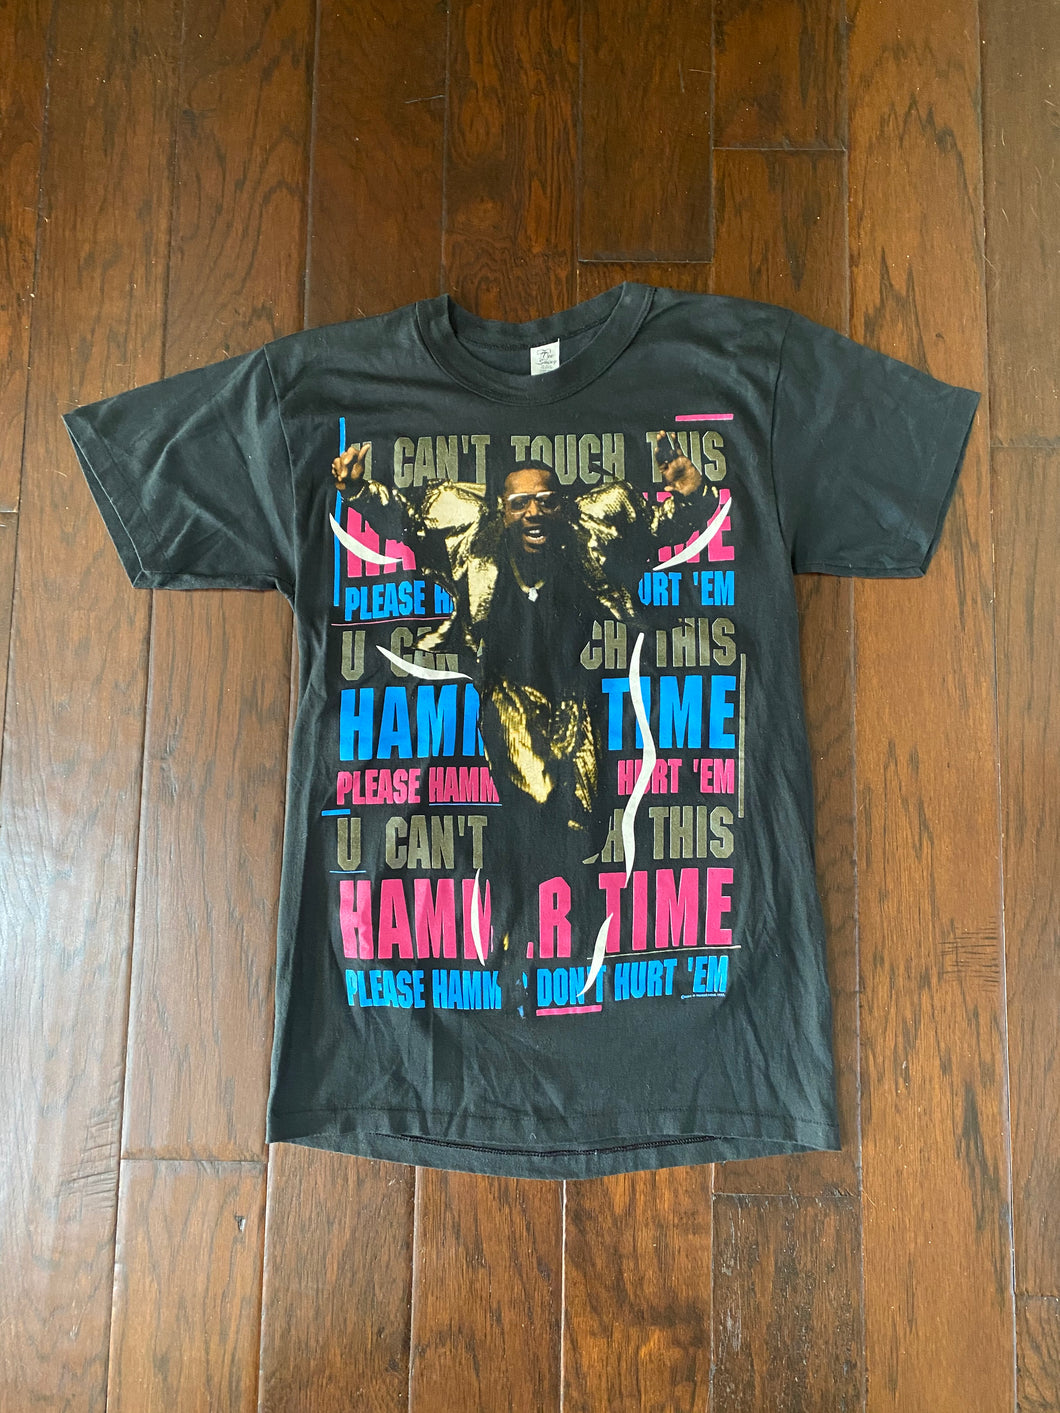 MC Hammer 1990 “U Can’t Touch This” Vintage Distressed T-shirt